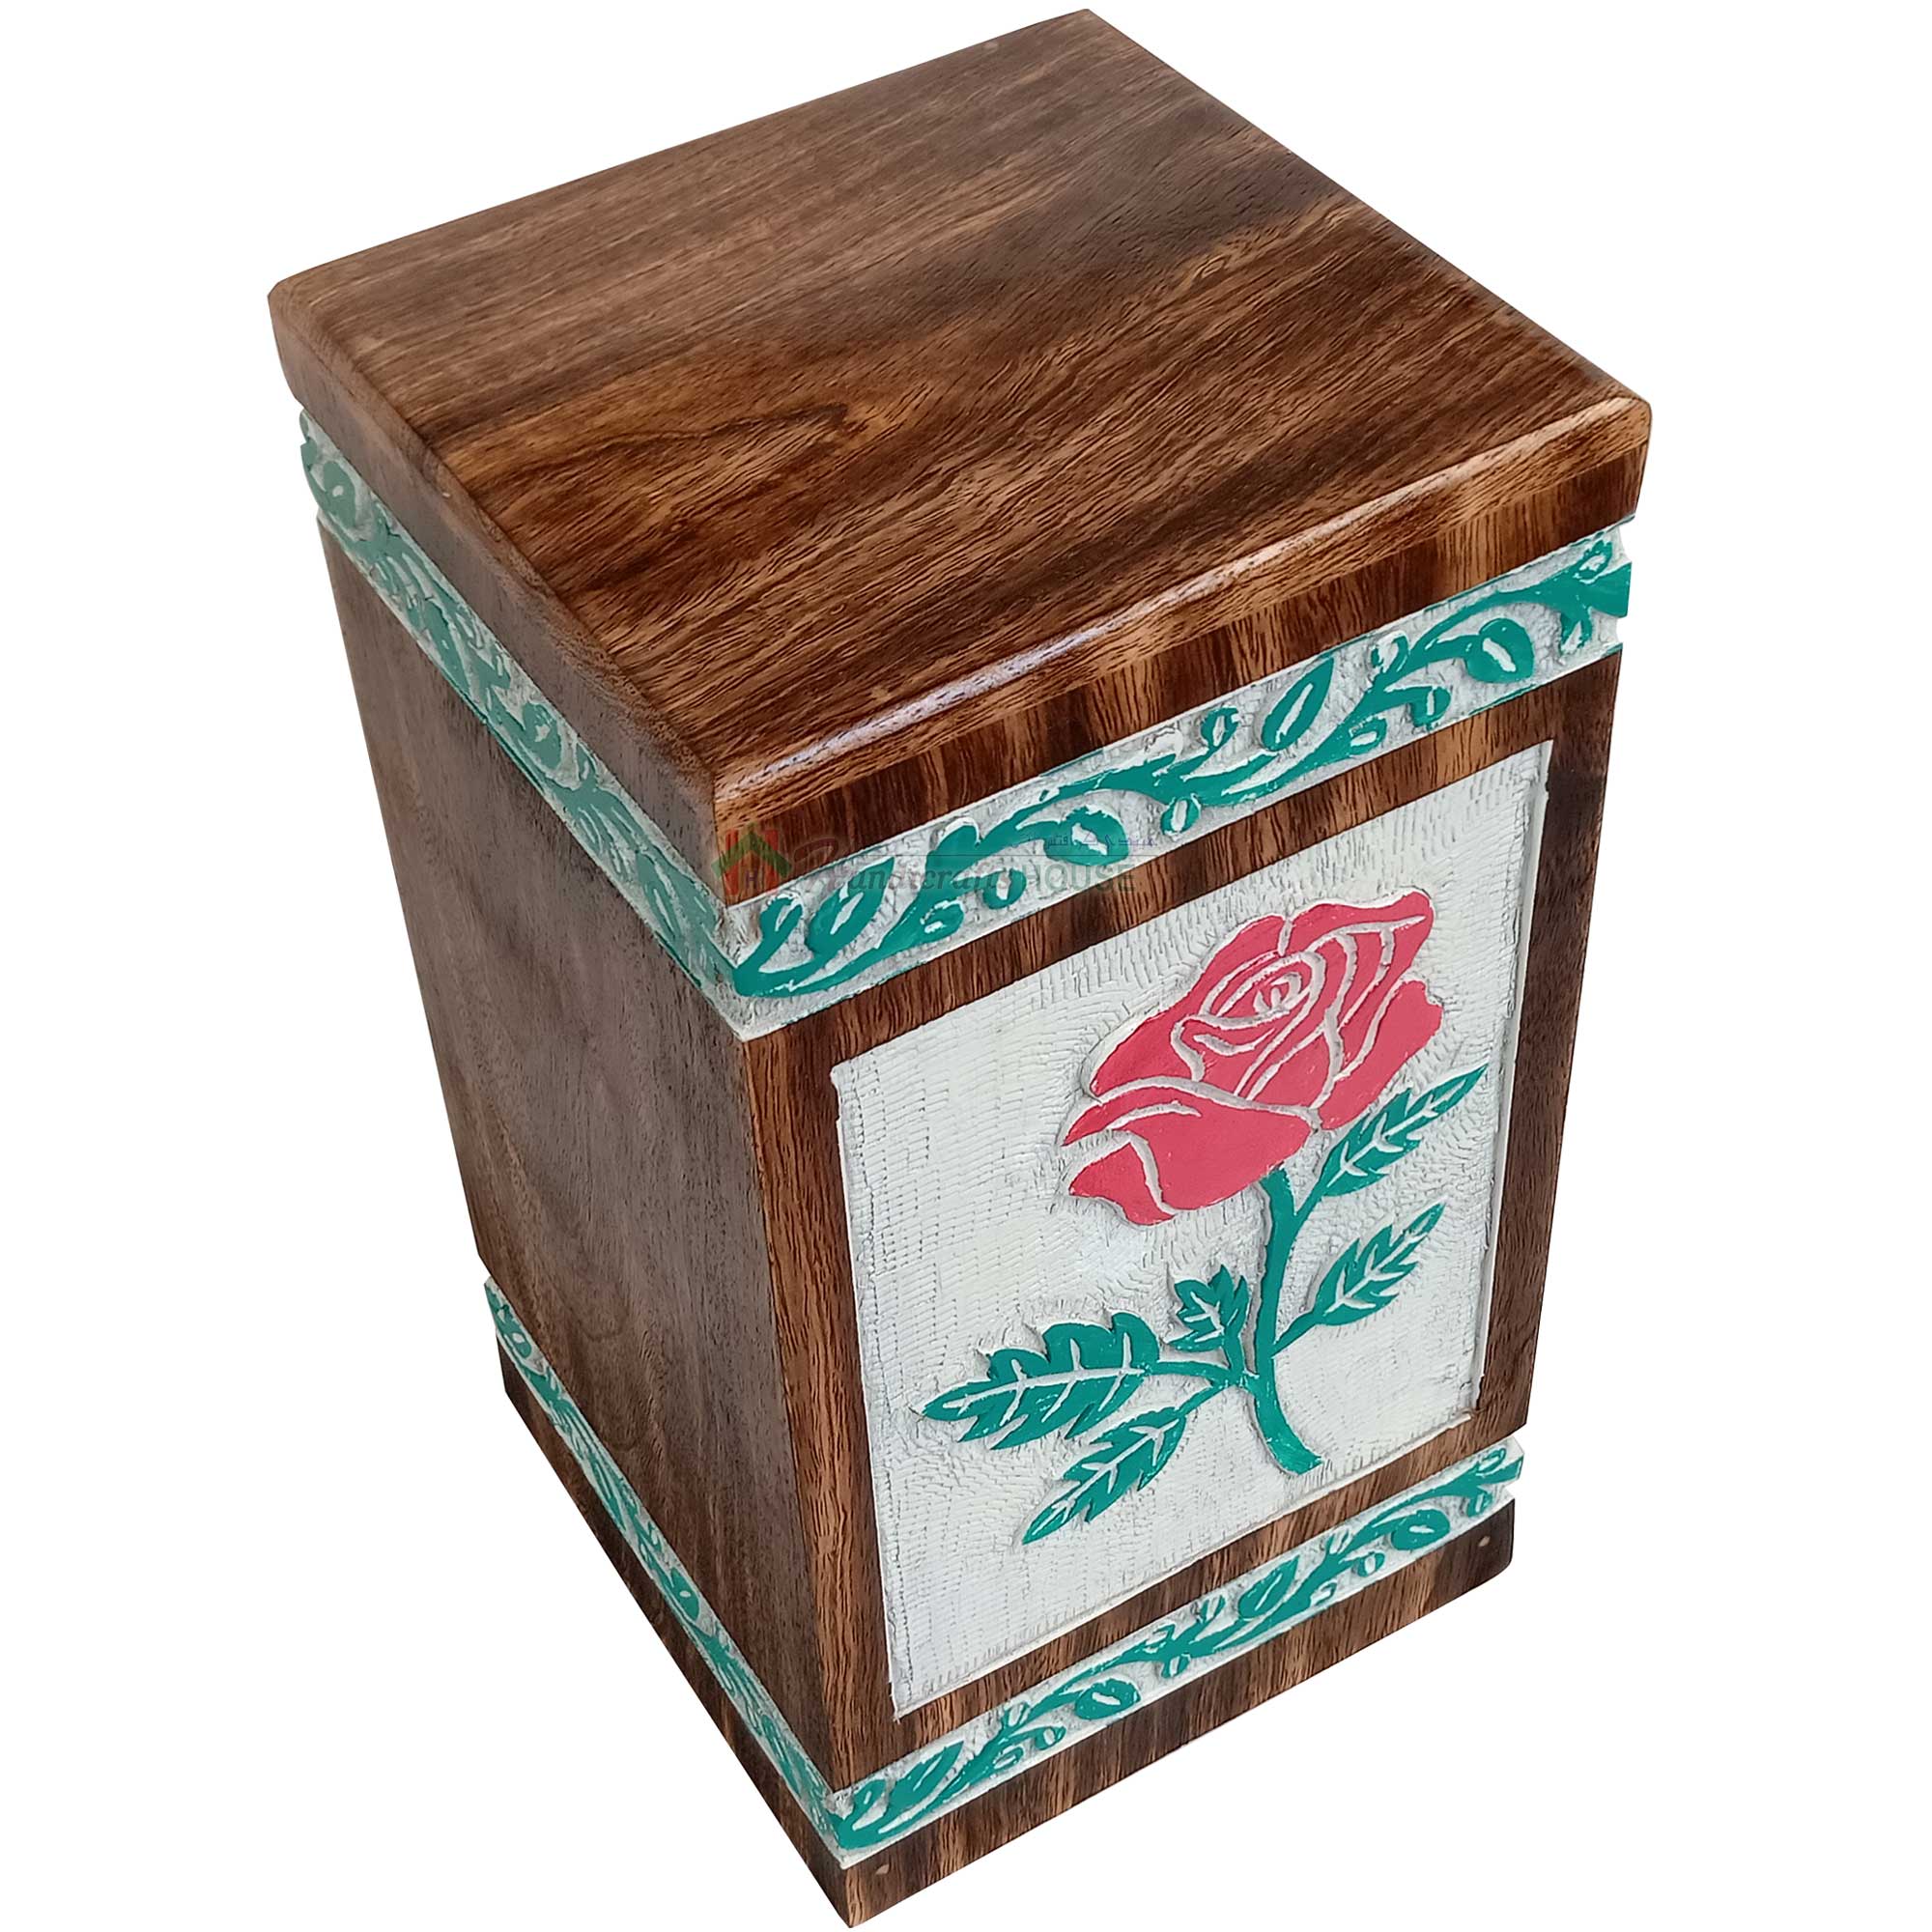 Hands Engraving Flower Urns, Wooden Urn for Pet Ashes -Solid wood Memorial Large Box in White, Green and Red Color